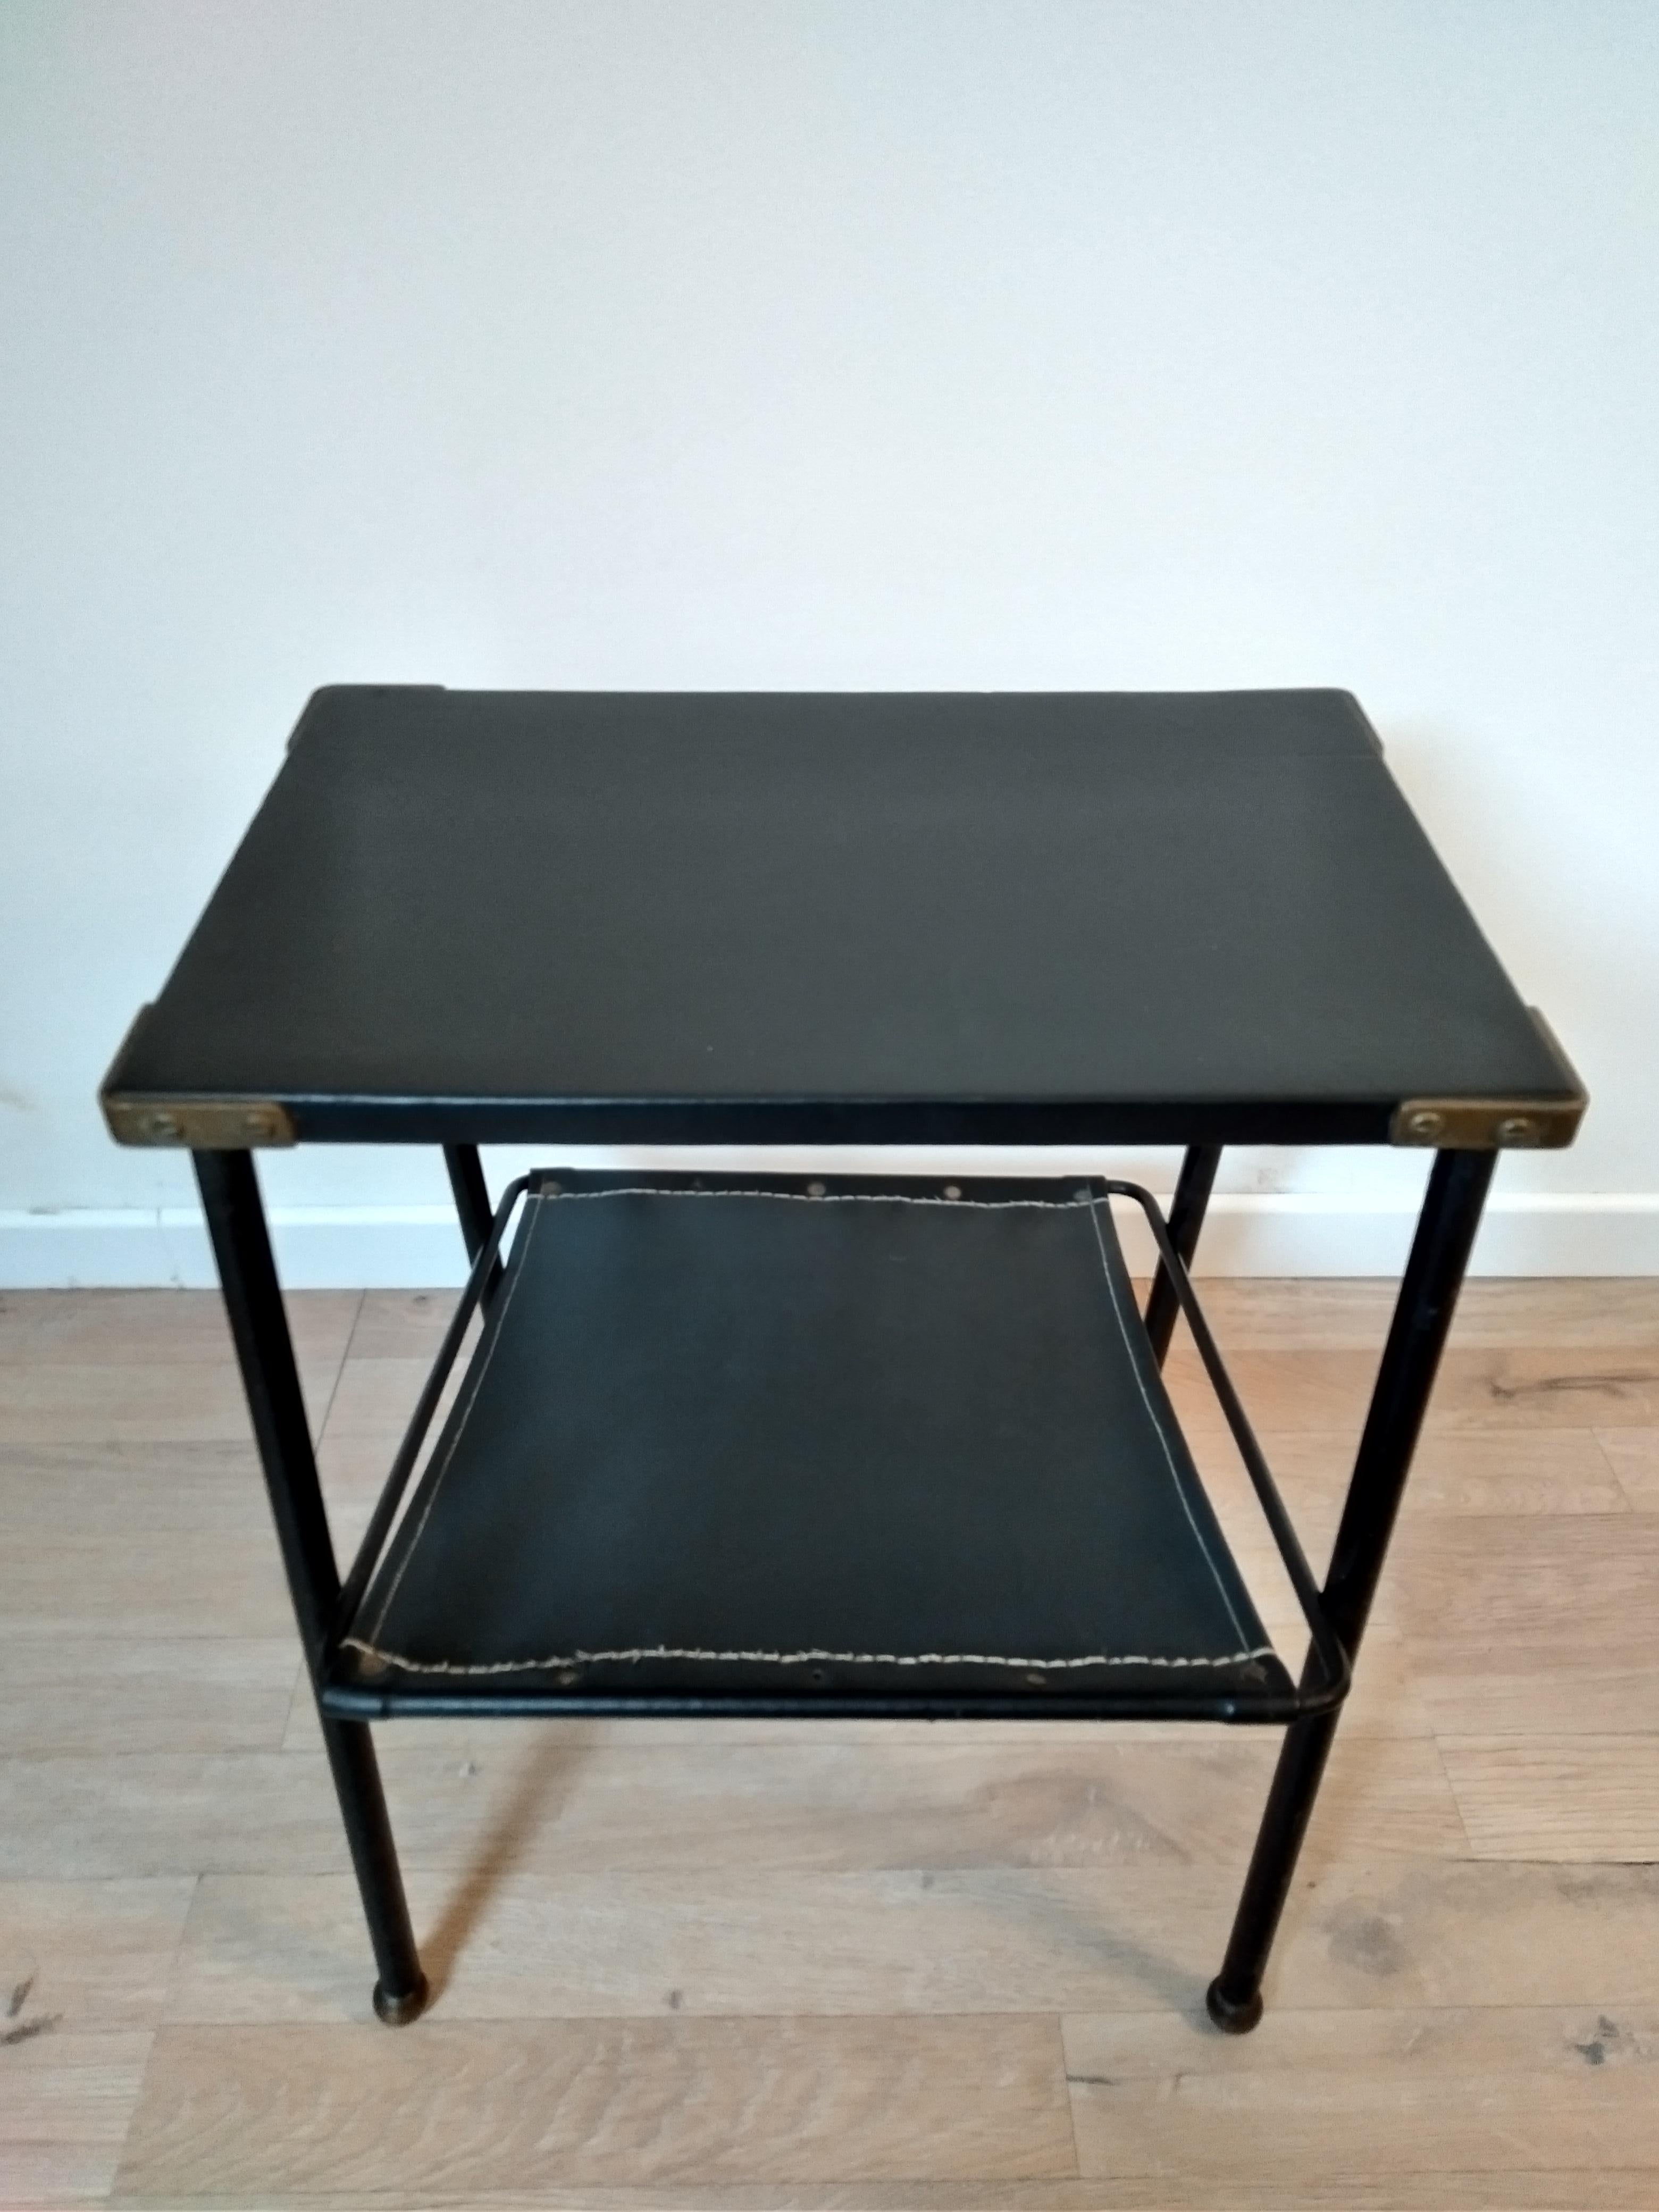 Mid-20th Century Jacques Adnet Black Leather and Metal Side Table, Magazine Rack, French, 1950s For Sale